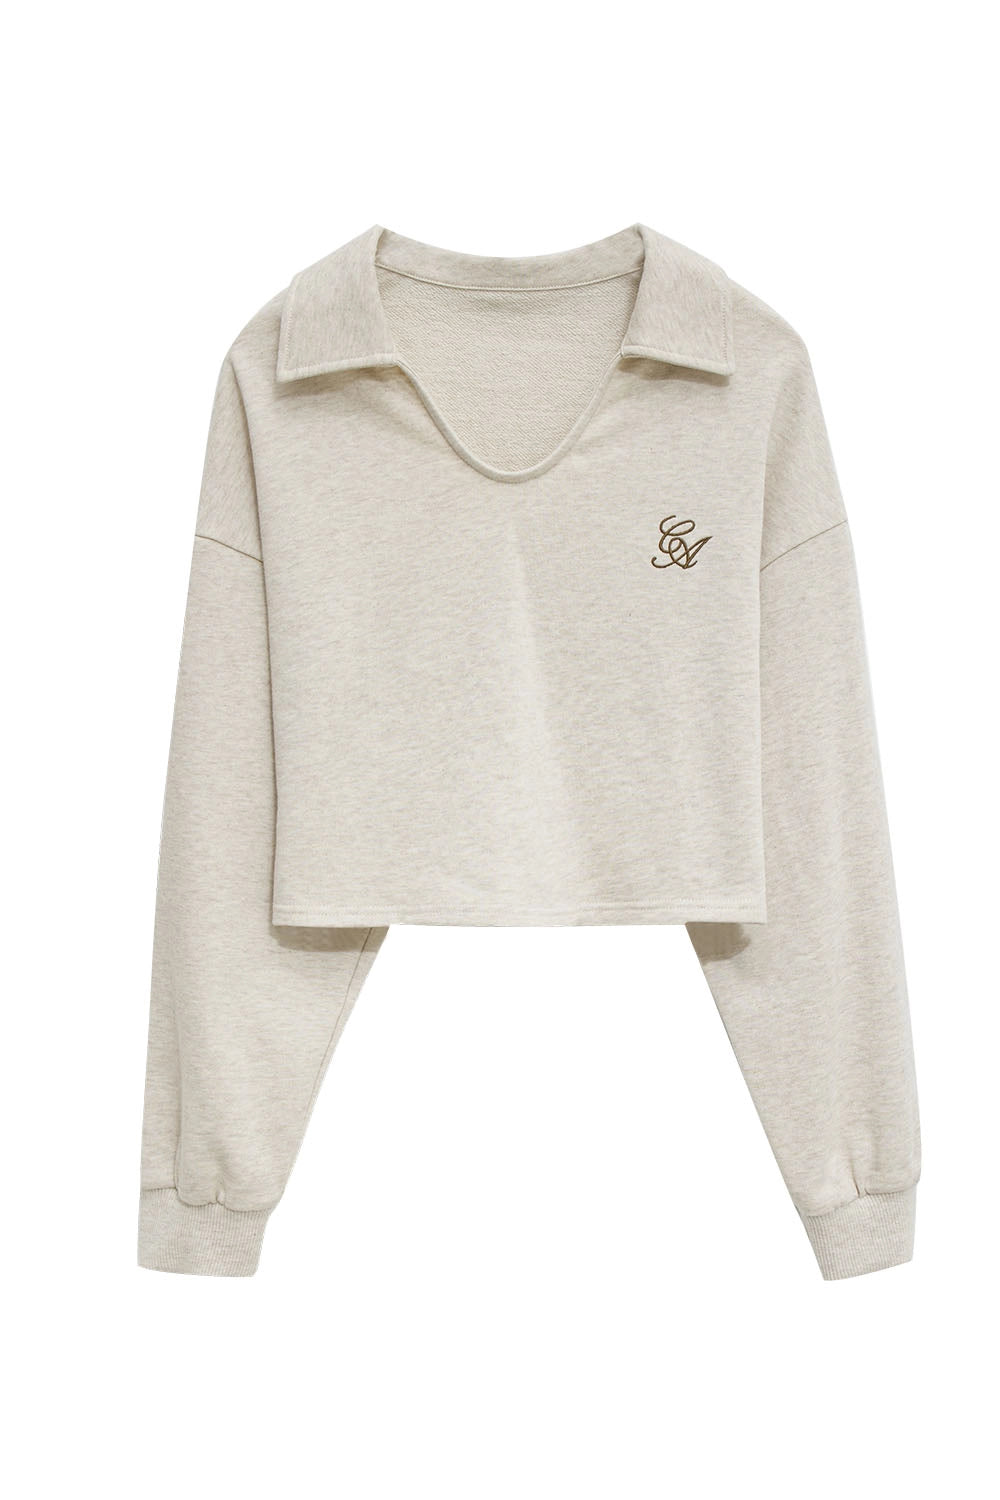 Women's Cropped Collared Sweatshirt with Embroidered Detail